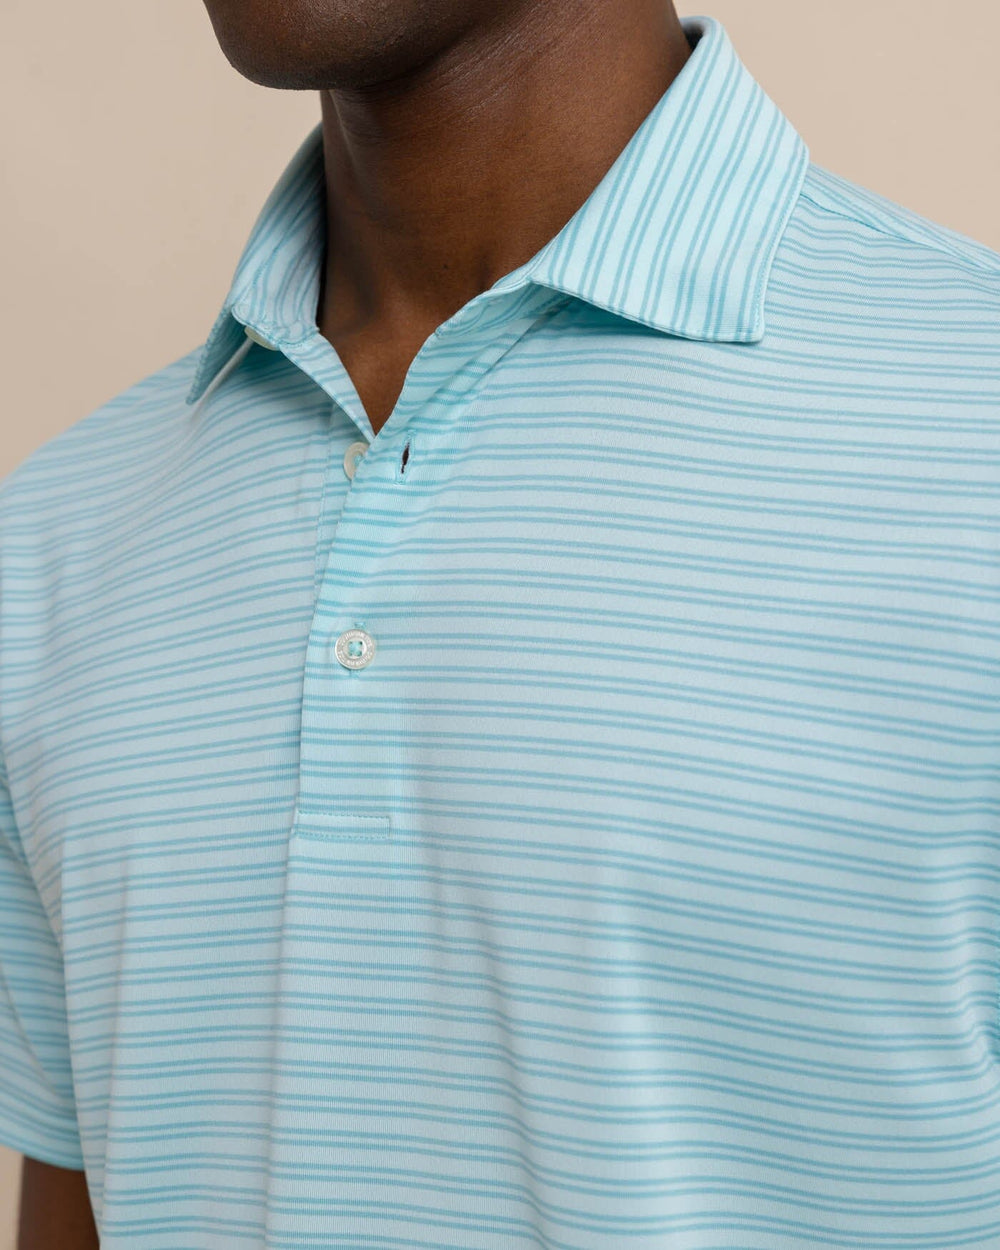 The detail view of the Southern Tide Driver Baywoods Stripe Polo by Southern Tide - Wake Blue